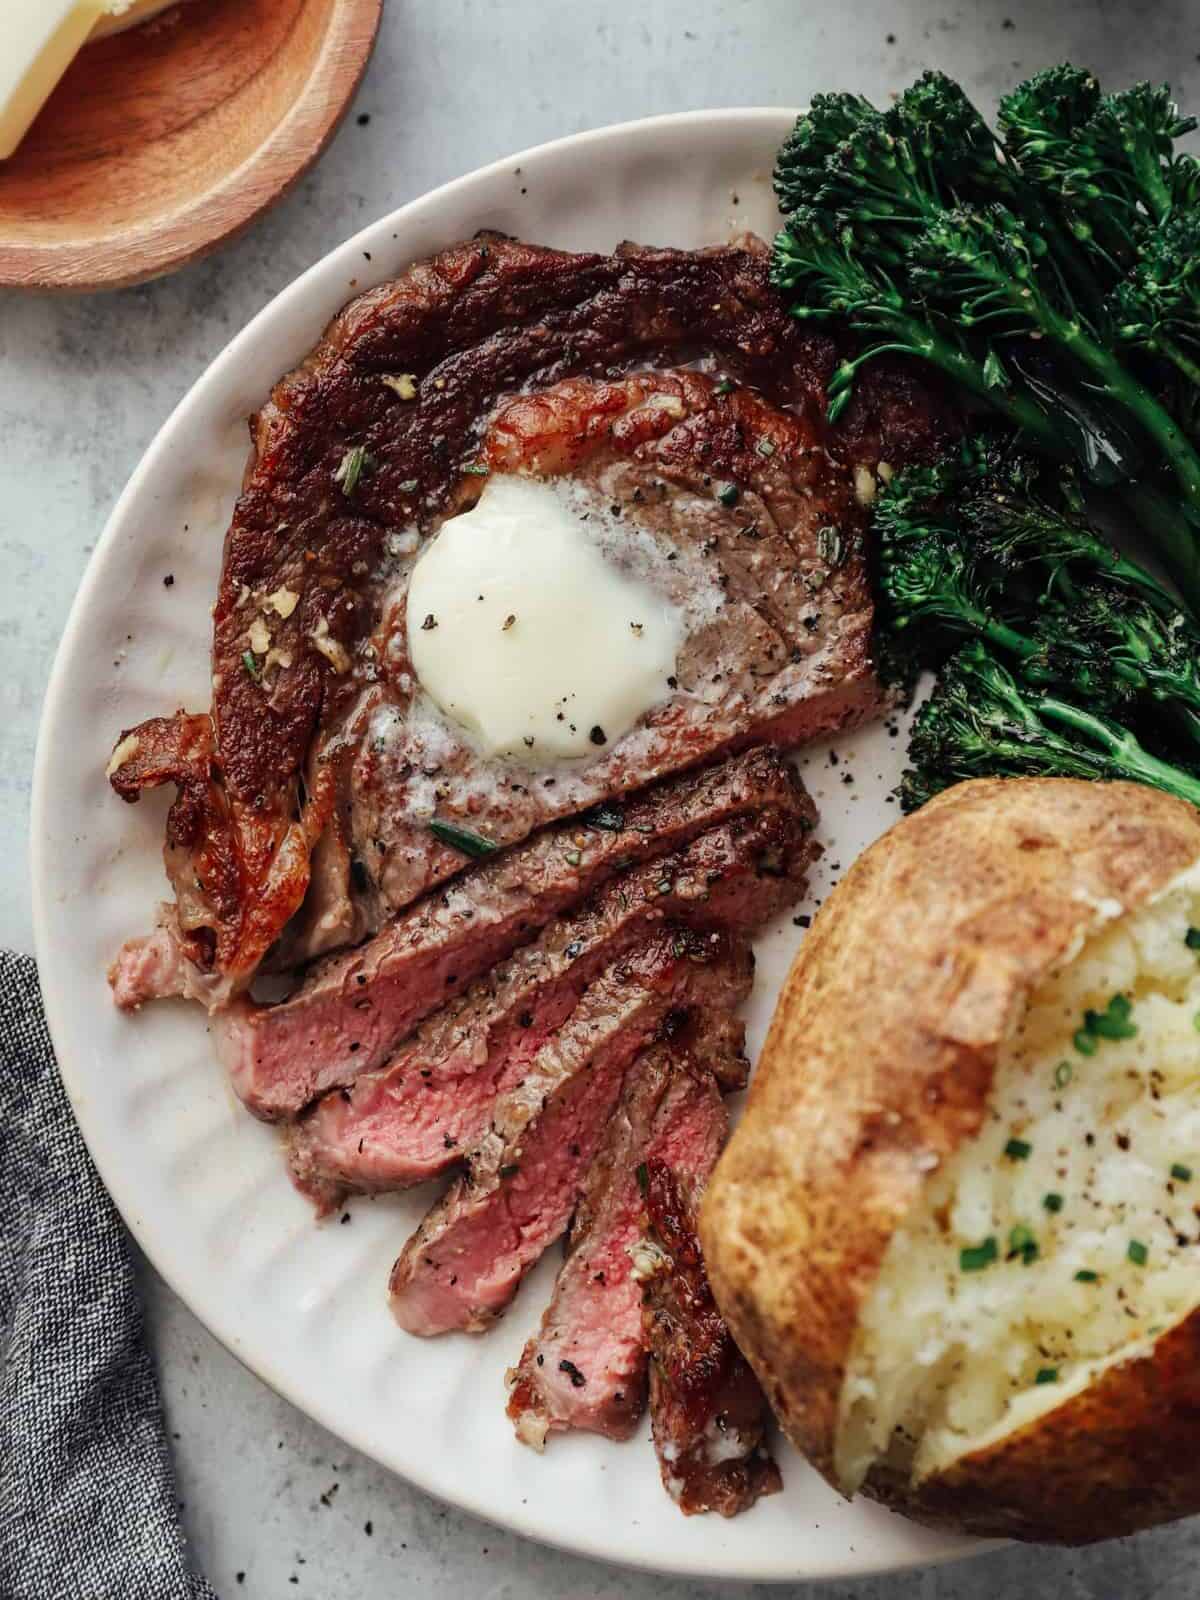 Grilled Ribeye Steak Dinner Recipe - No Need to Go to a Steakhouse